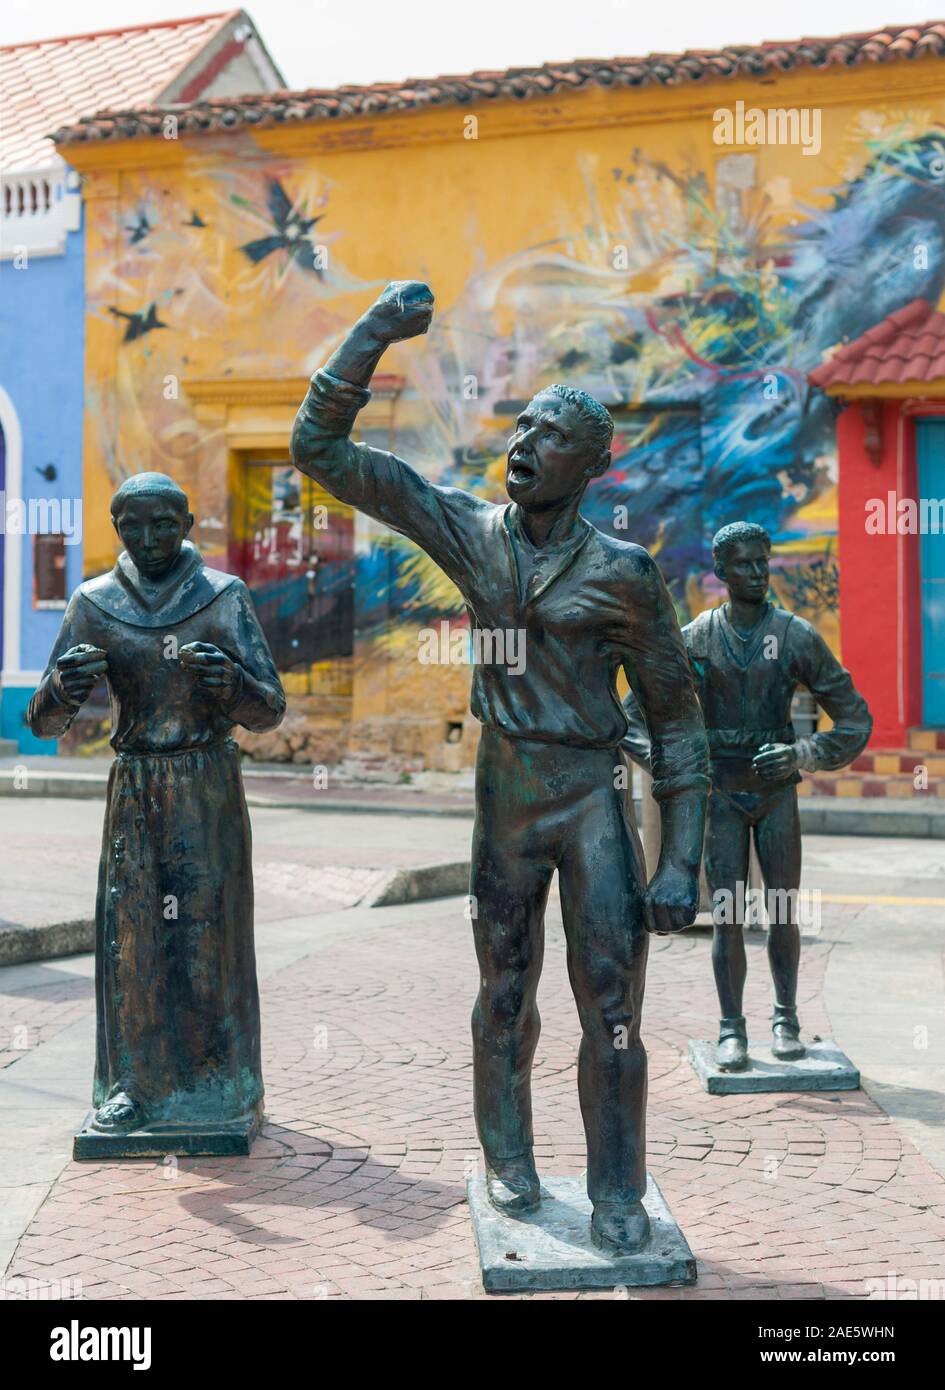 Sculptures in Holy Trinity square (Plaza Trinidad) in the Getsemani neighborhood of Cartagena, Colombia. Stock Photo